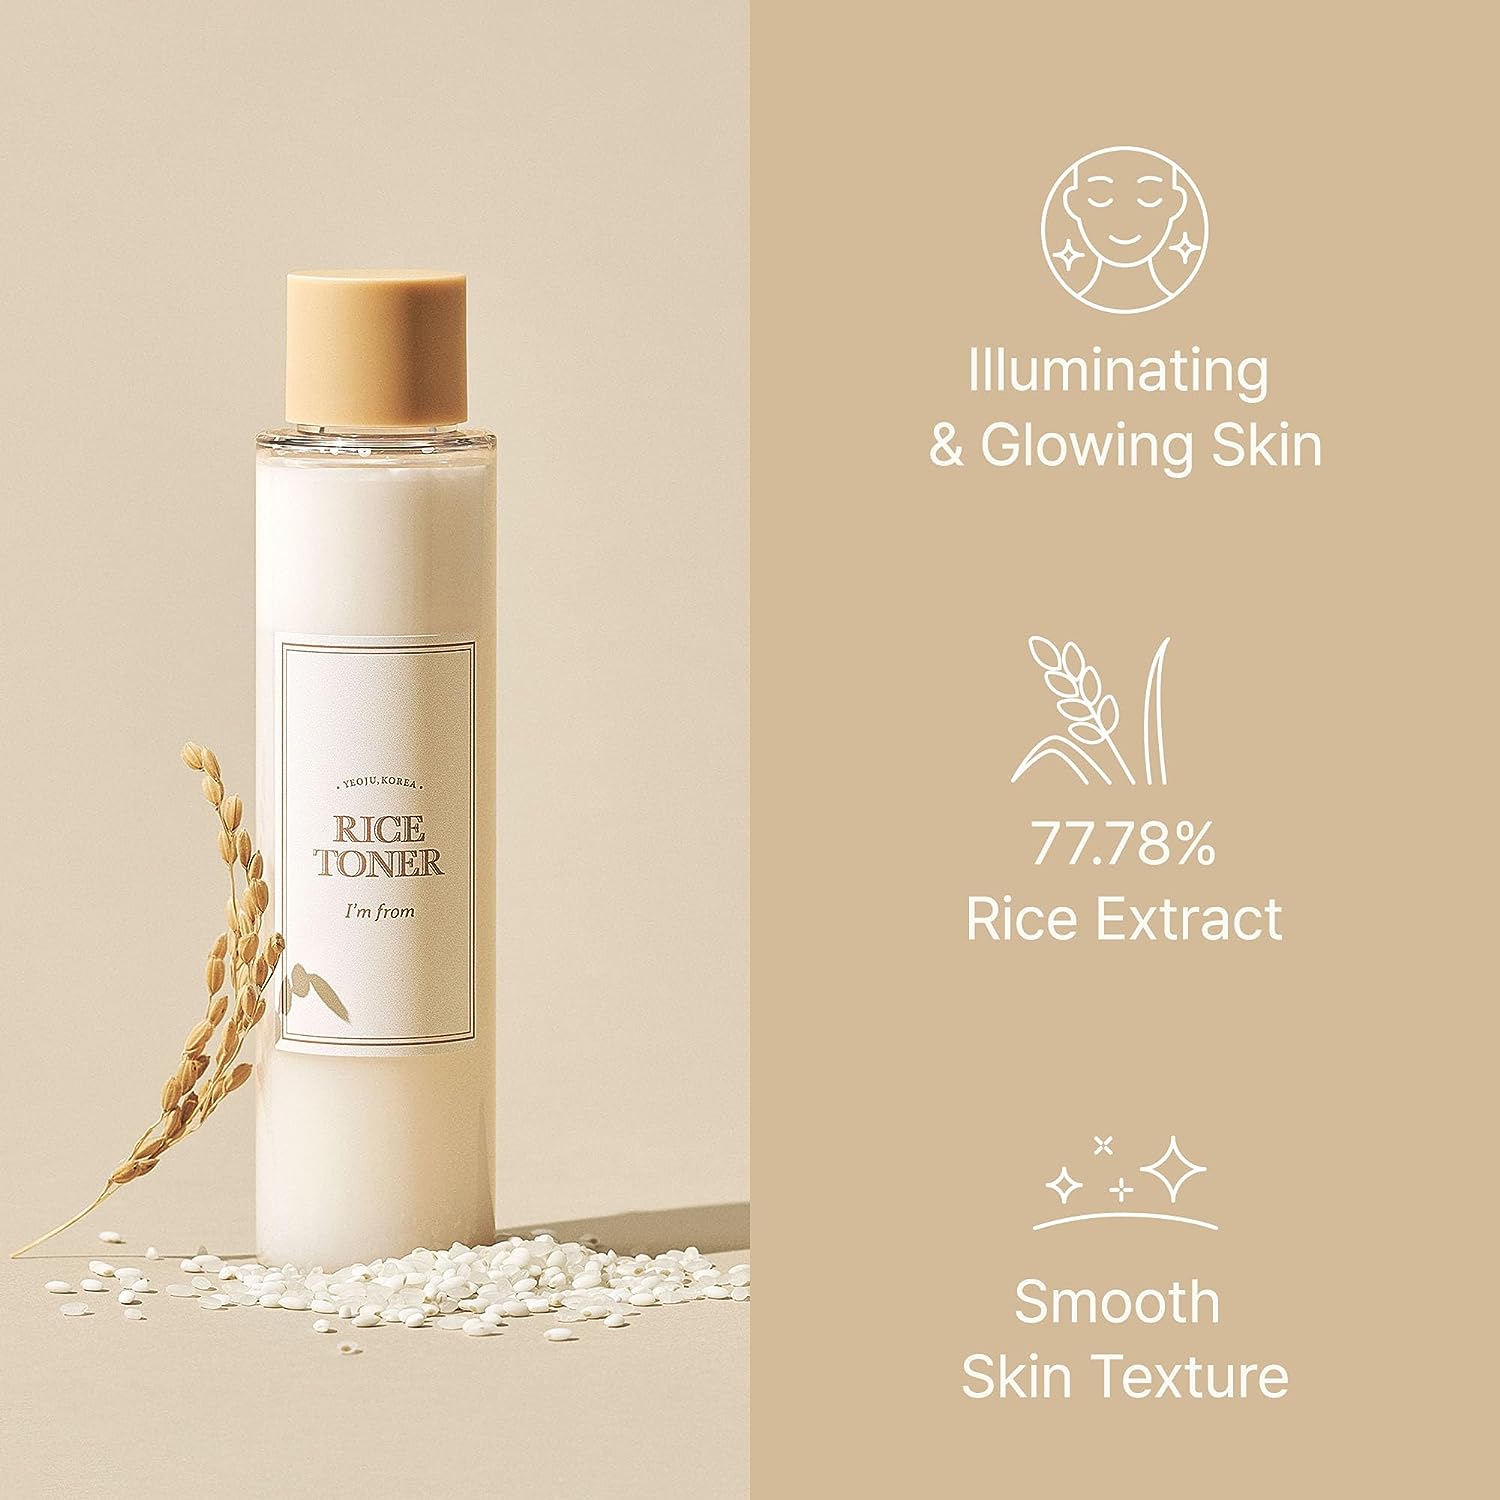 I'm from Rice Toner, 77.78% Rice Extract from Korea, Glow Essence